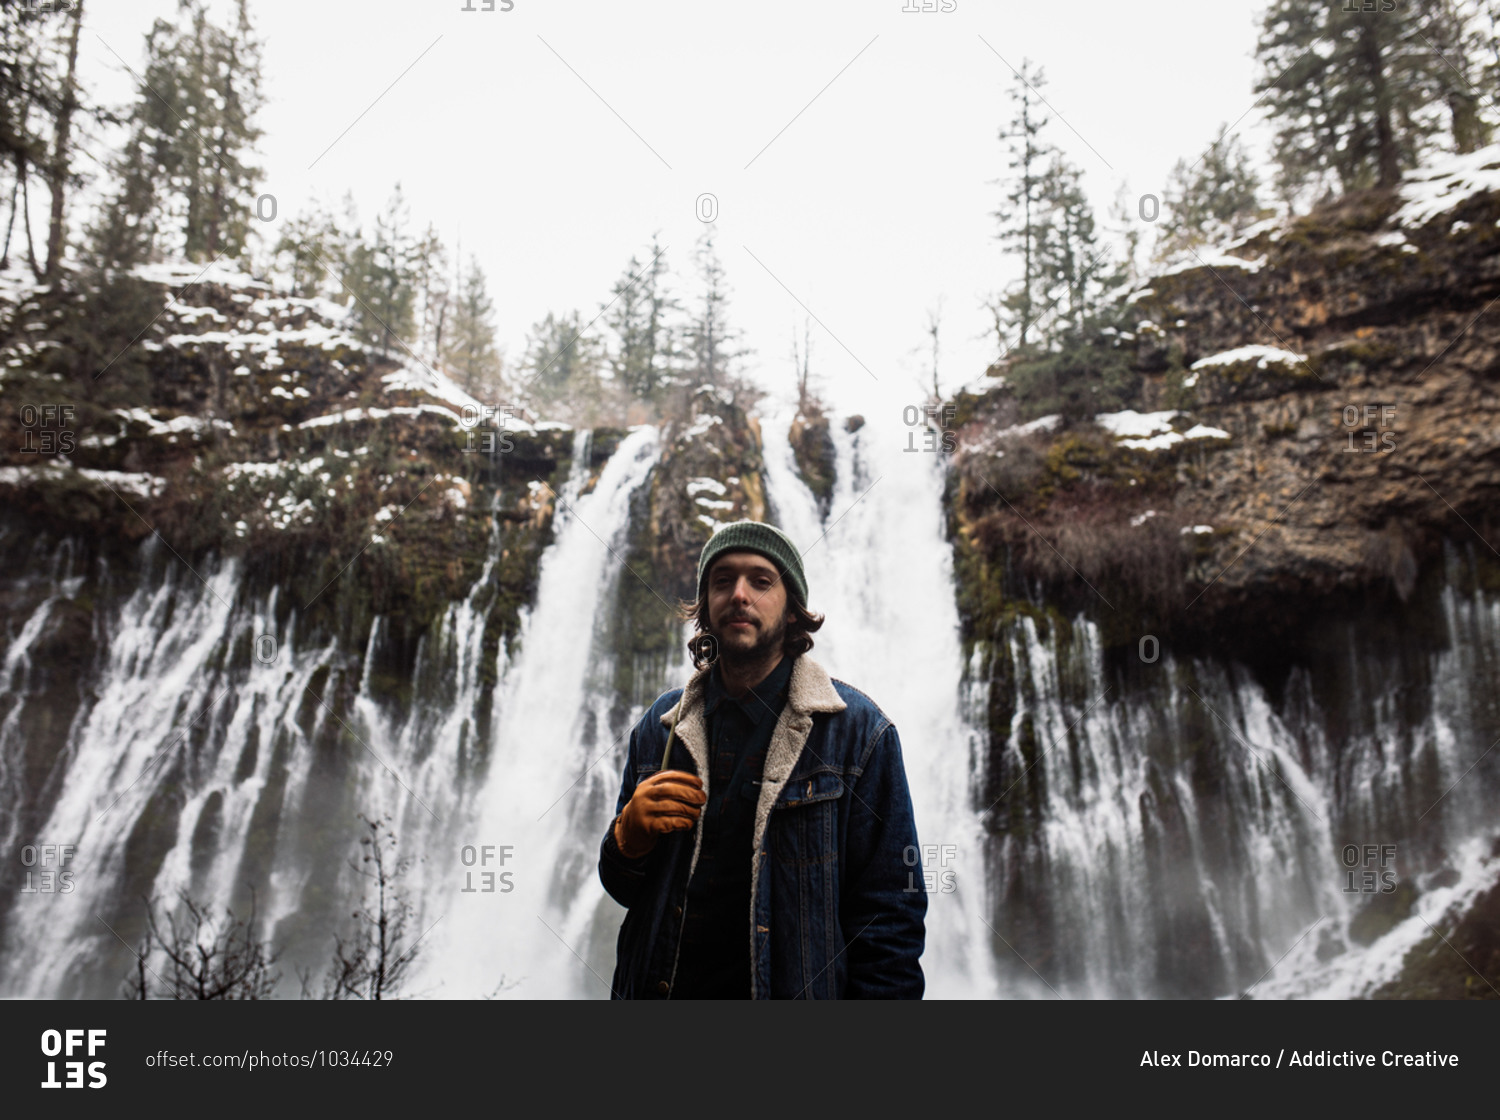 Man standing on picturesque scenery of powerful waterfall with pool flowing among snowy forest in mountainous terrain in winter day in USA looking at camera